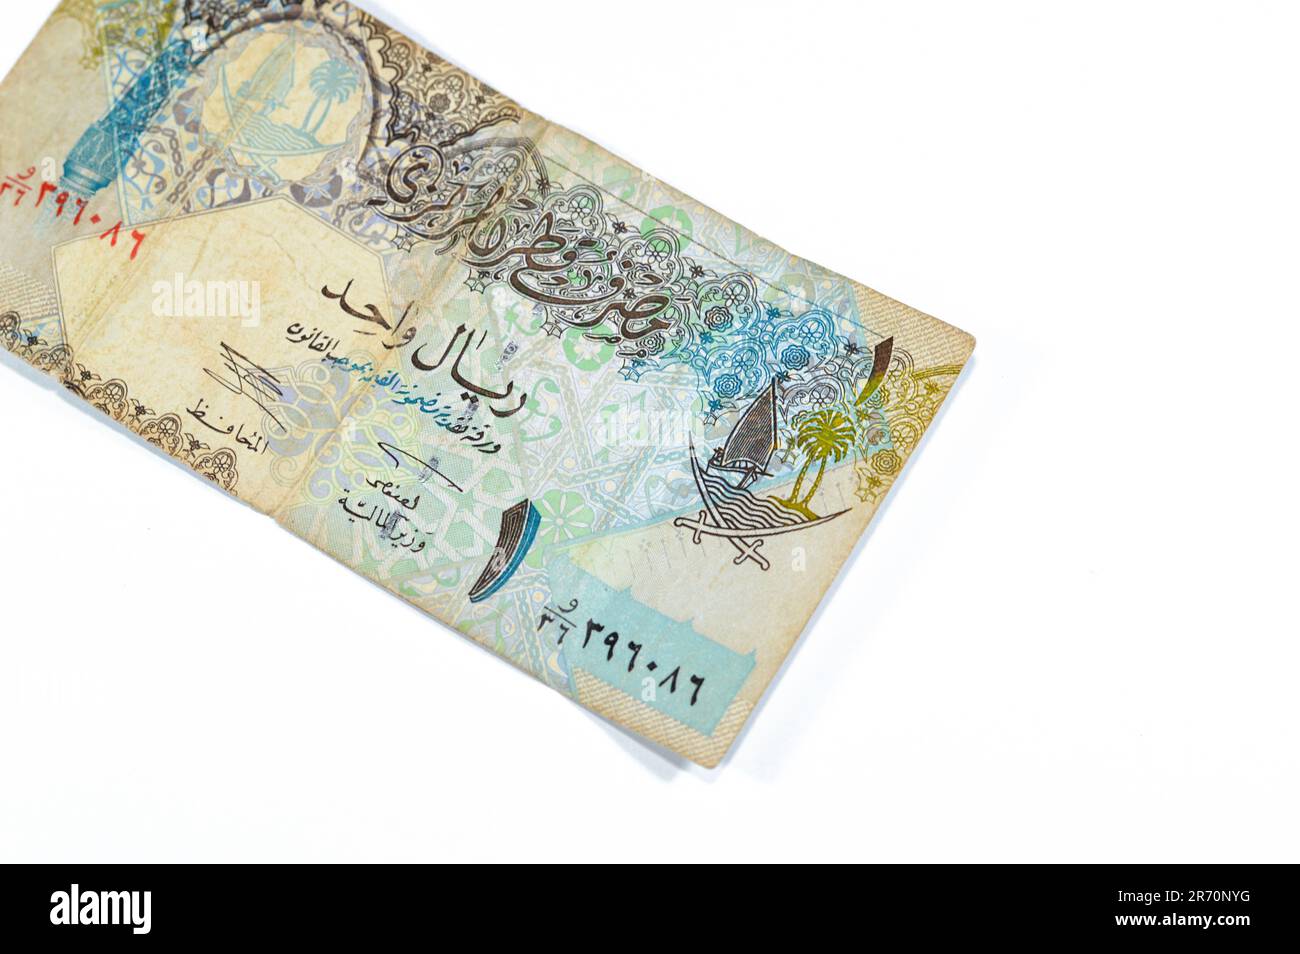 obverse side of 1 Qatari Riyal cash money currency of Qatar banknote features Ornated column, arches, sailboats, palm trees, crossed swords, vintage r Stock Photo